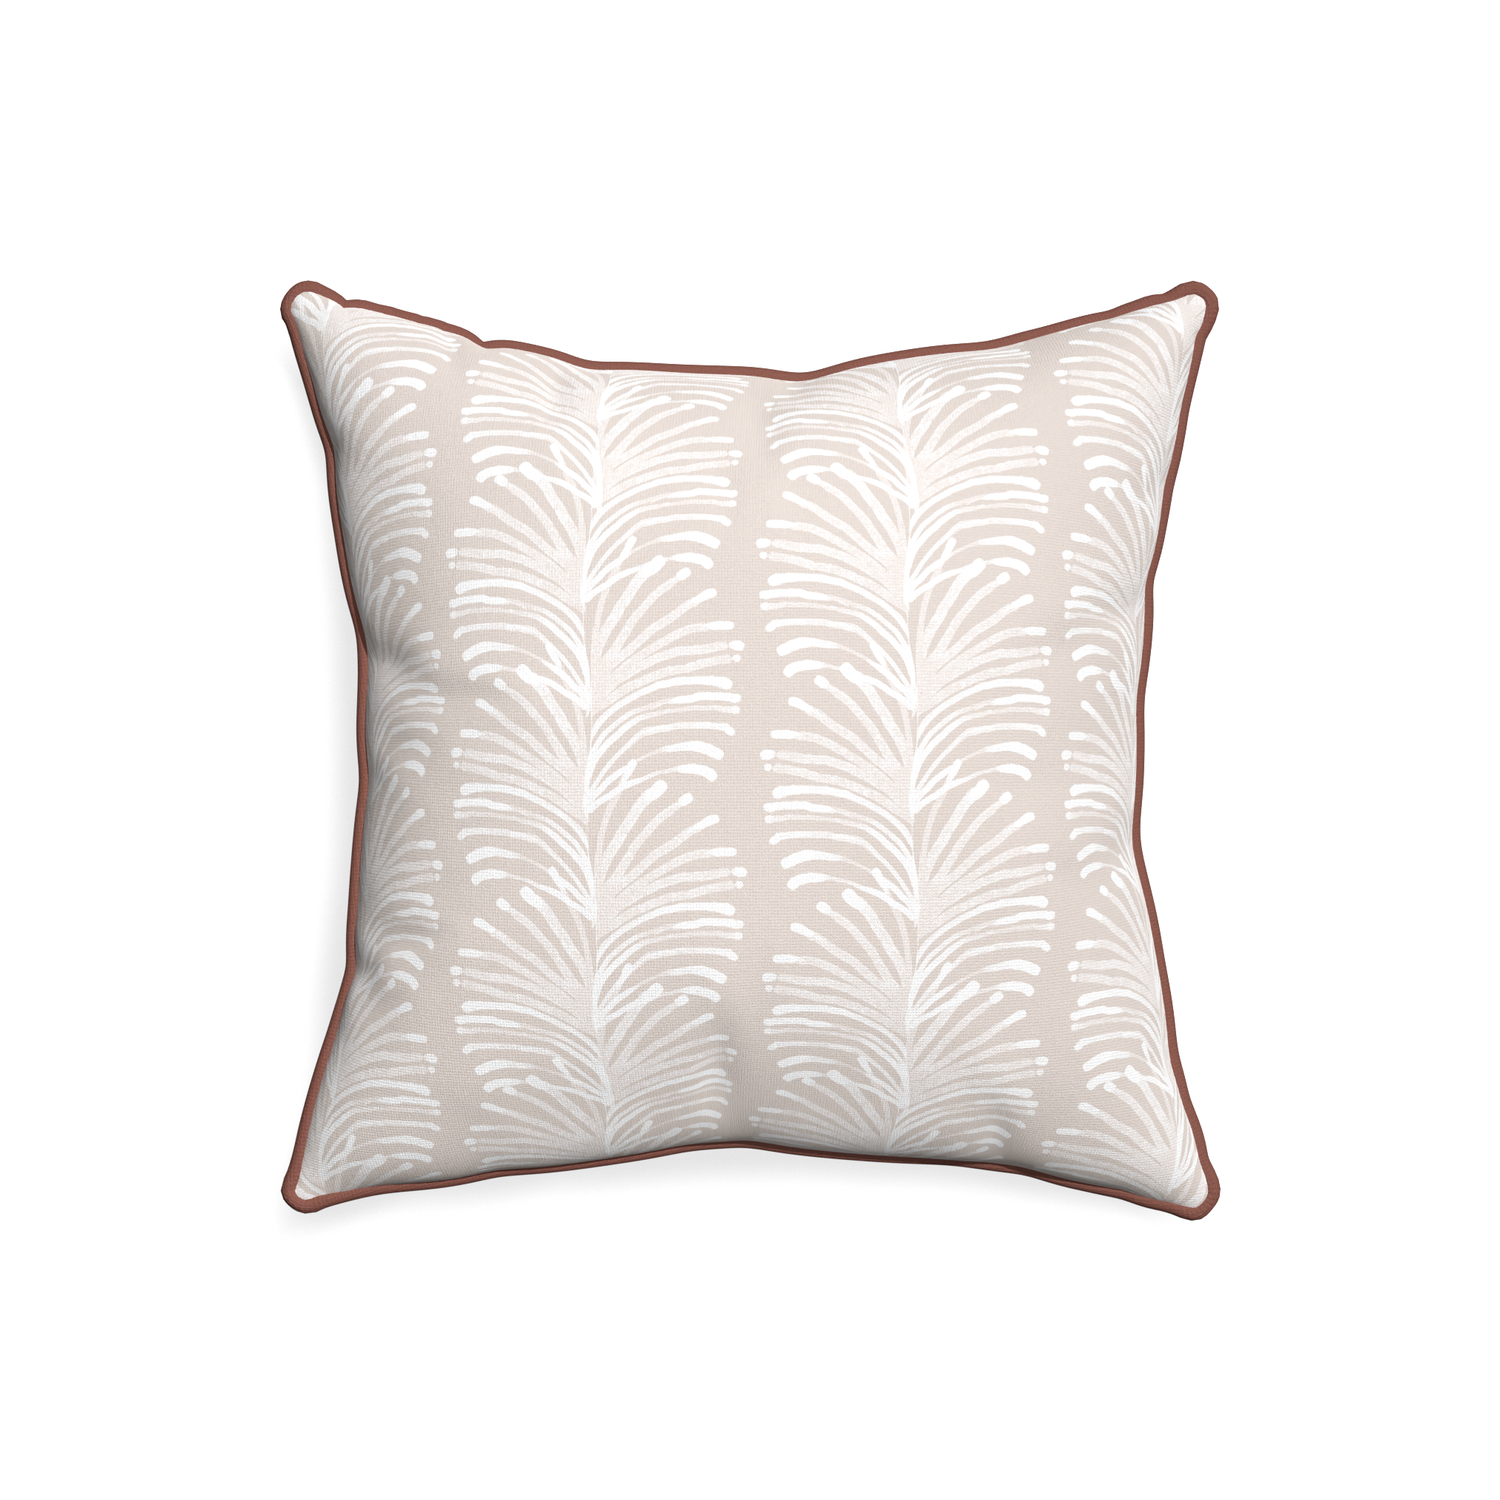 20-square emma sand custom sand colored botanical stripepillow with w piping on white background